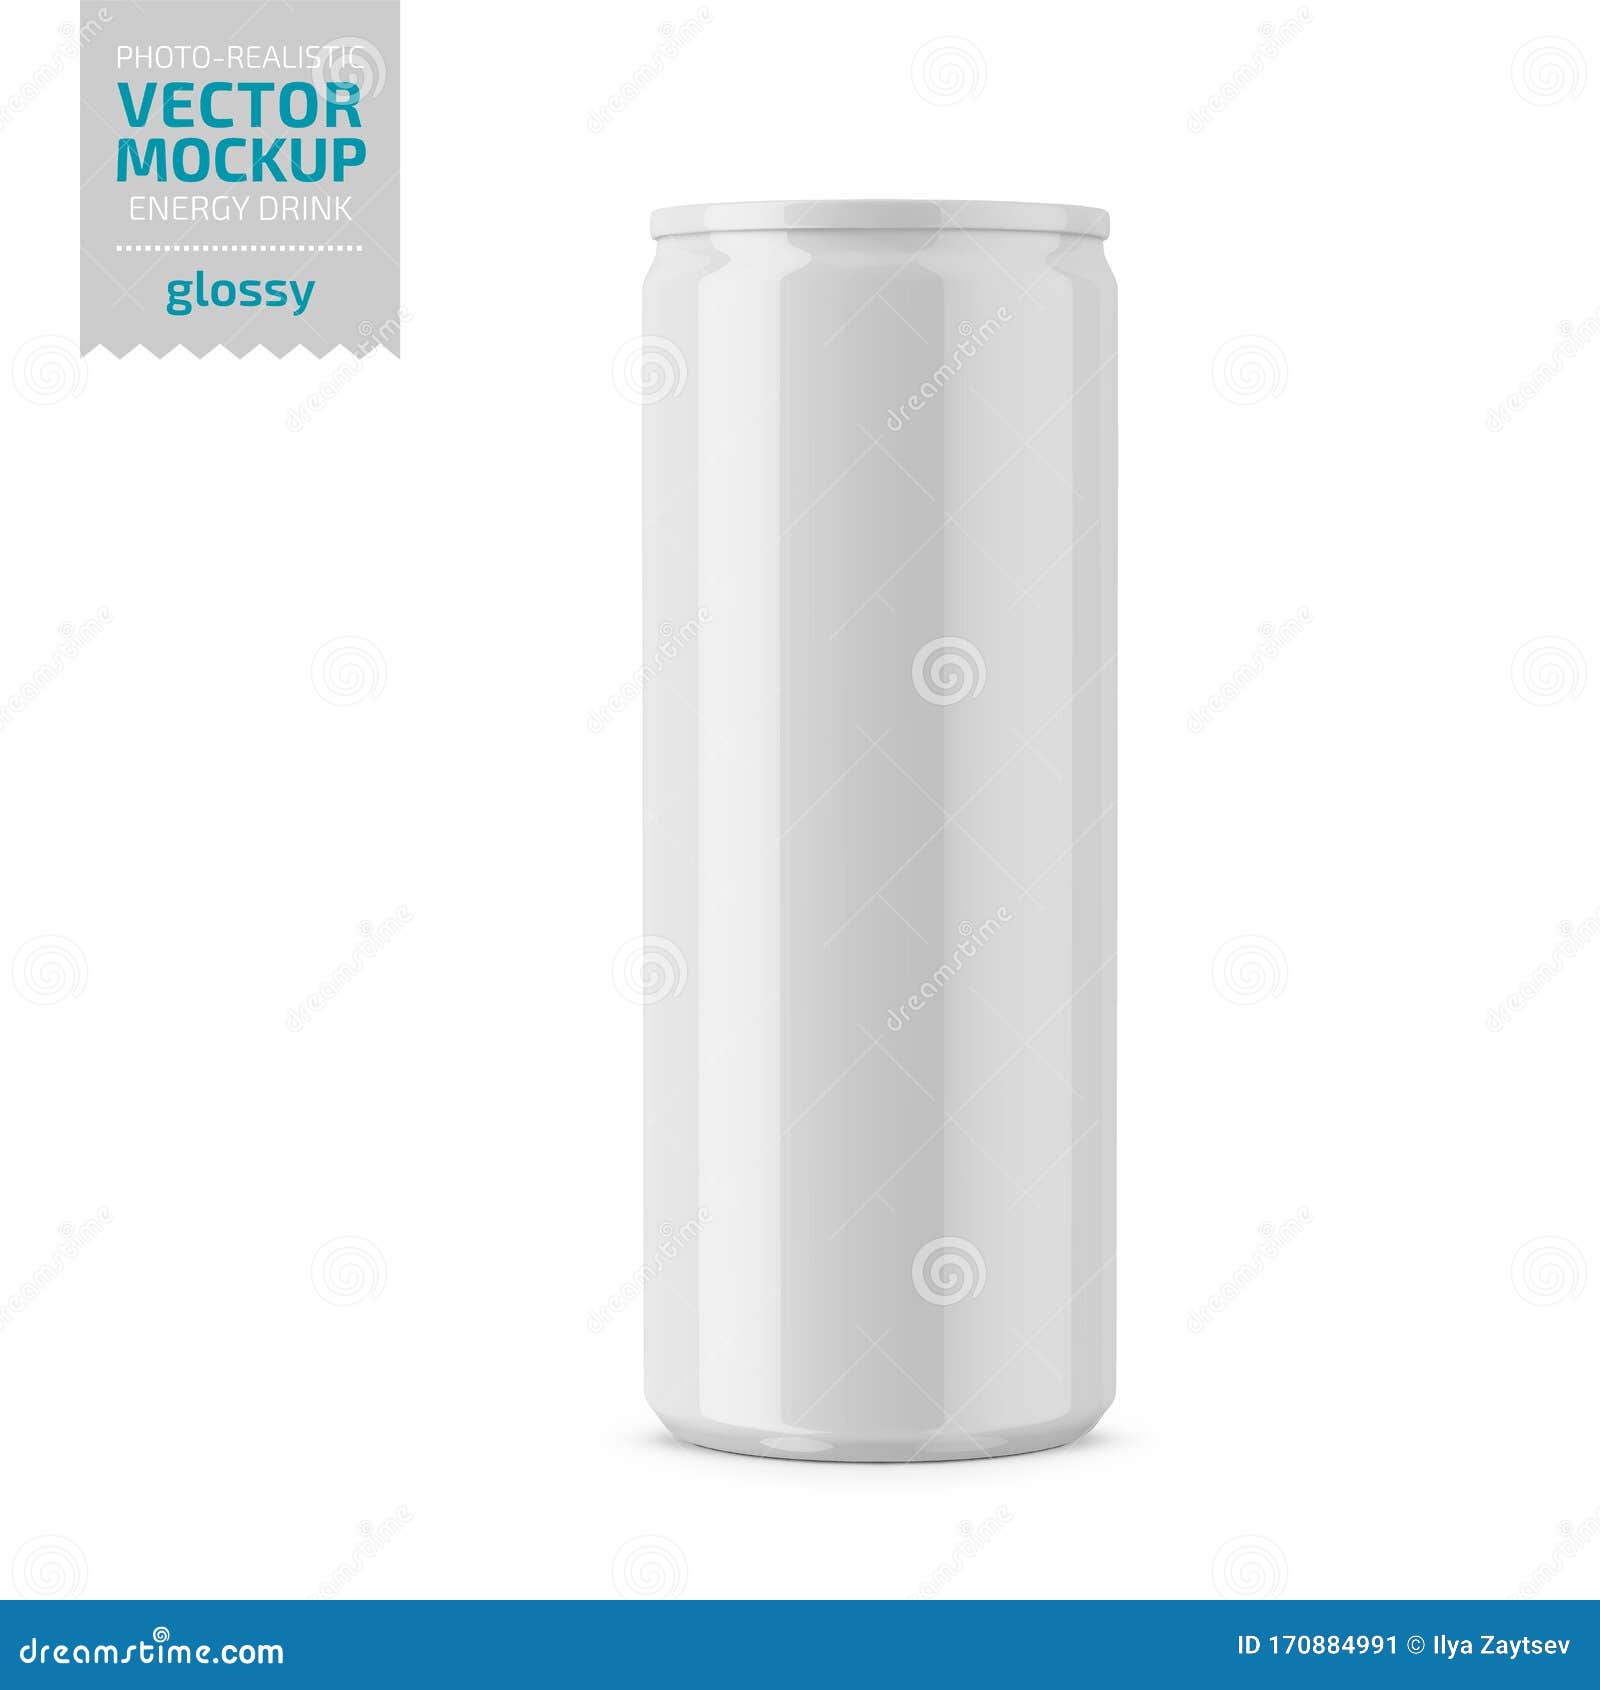 Download White Glossy Energy Drink Can Vector Mockup Stock Vector Illustration Of Shiny Isolated 170884991